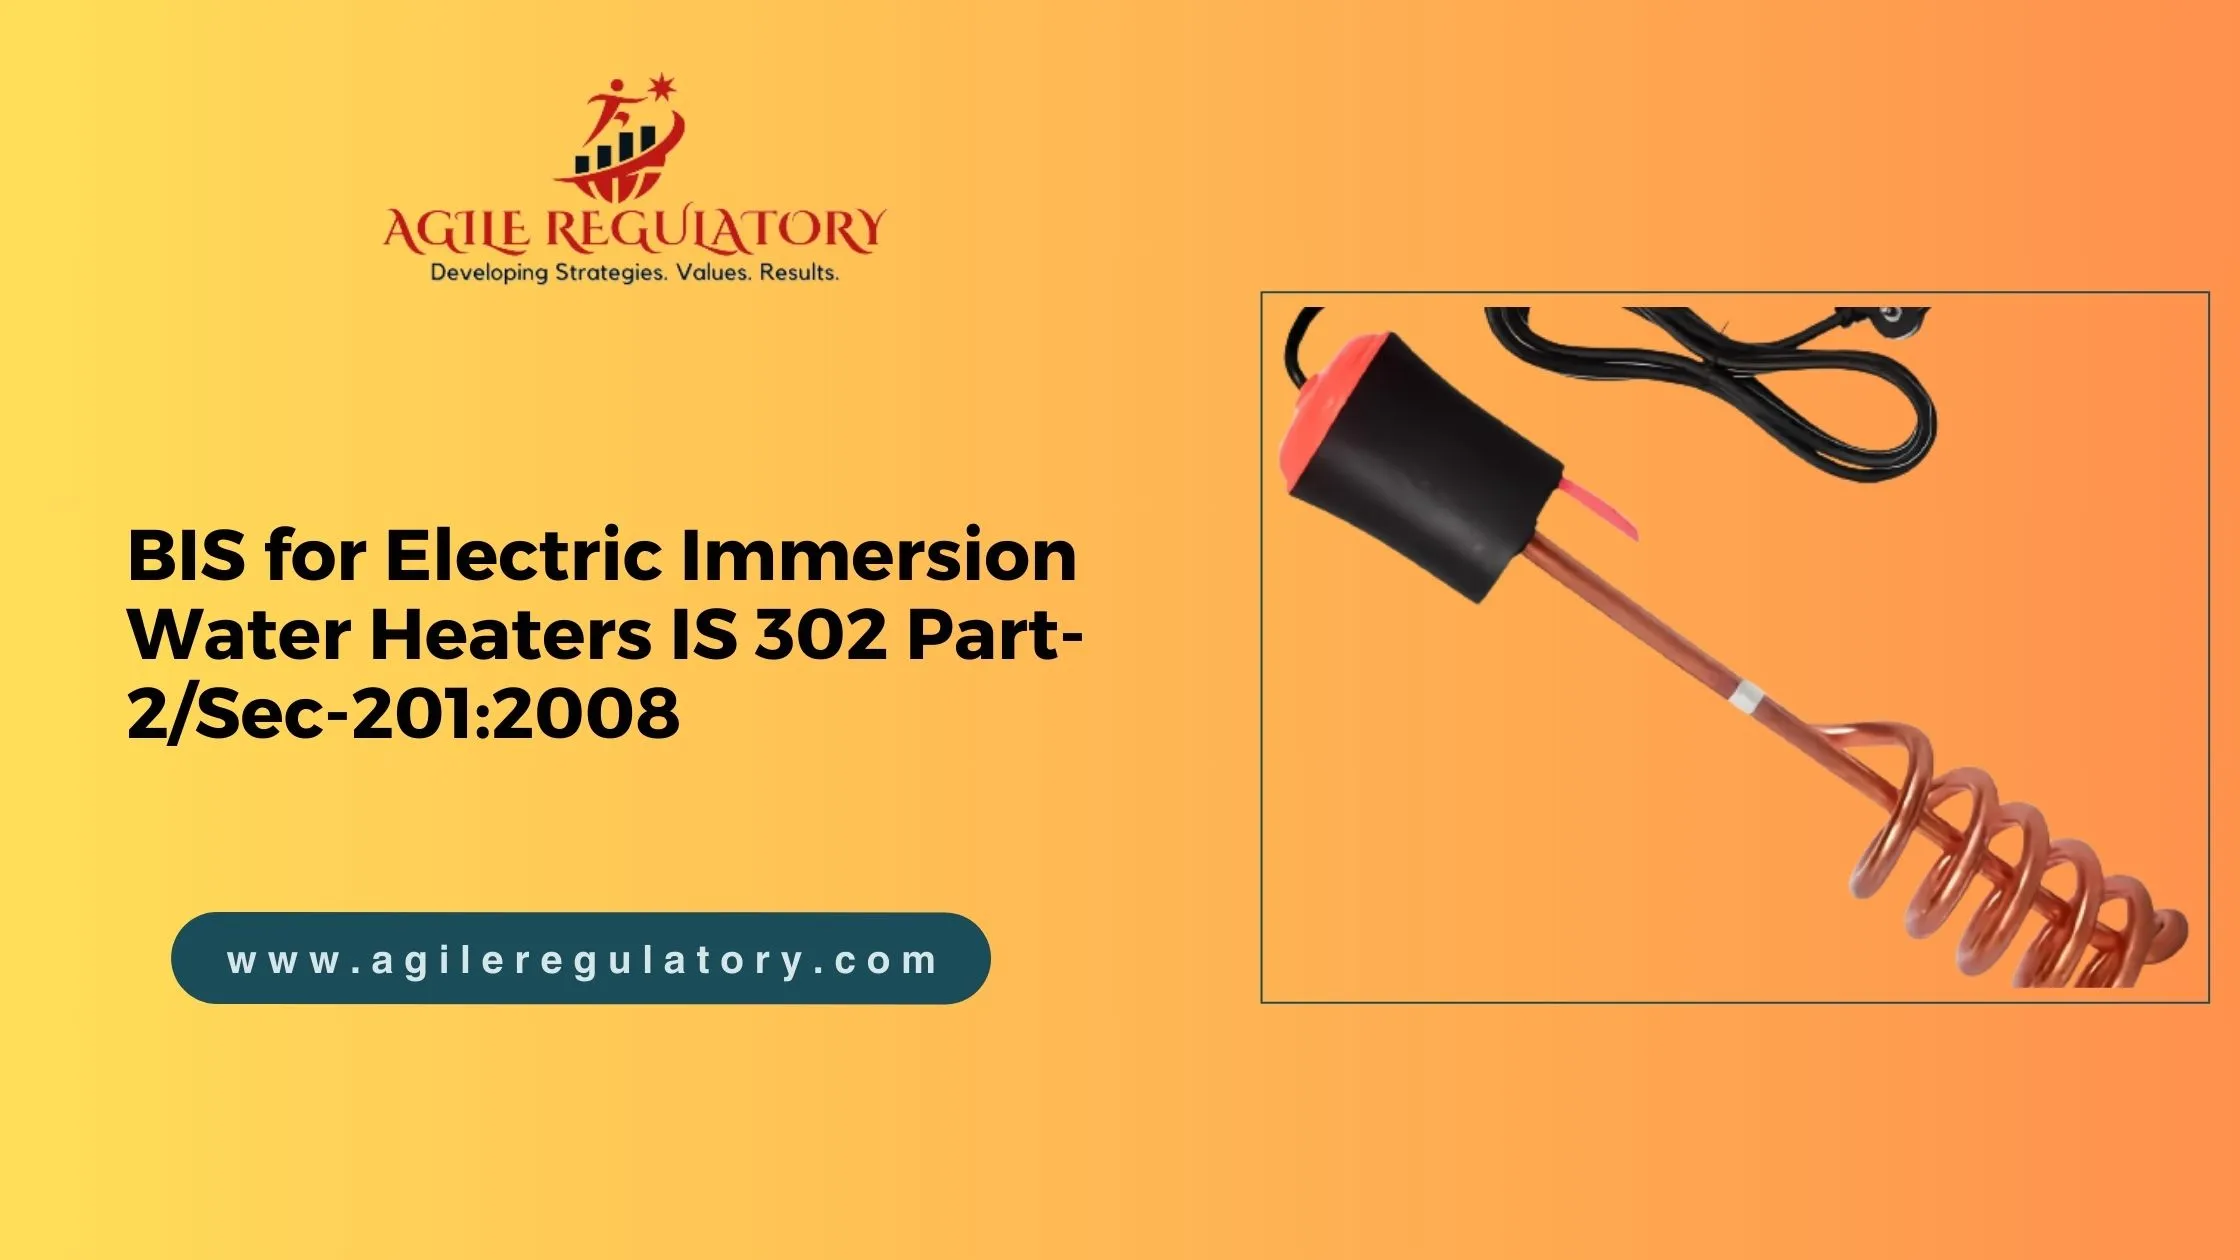 BIS CERTIFICATION (ISI) FOR ELECTRIC IRON IS 302 (Part 2/Sec 3):2007